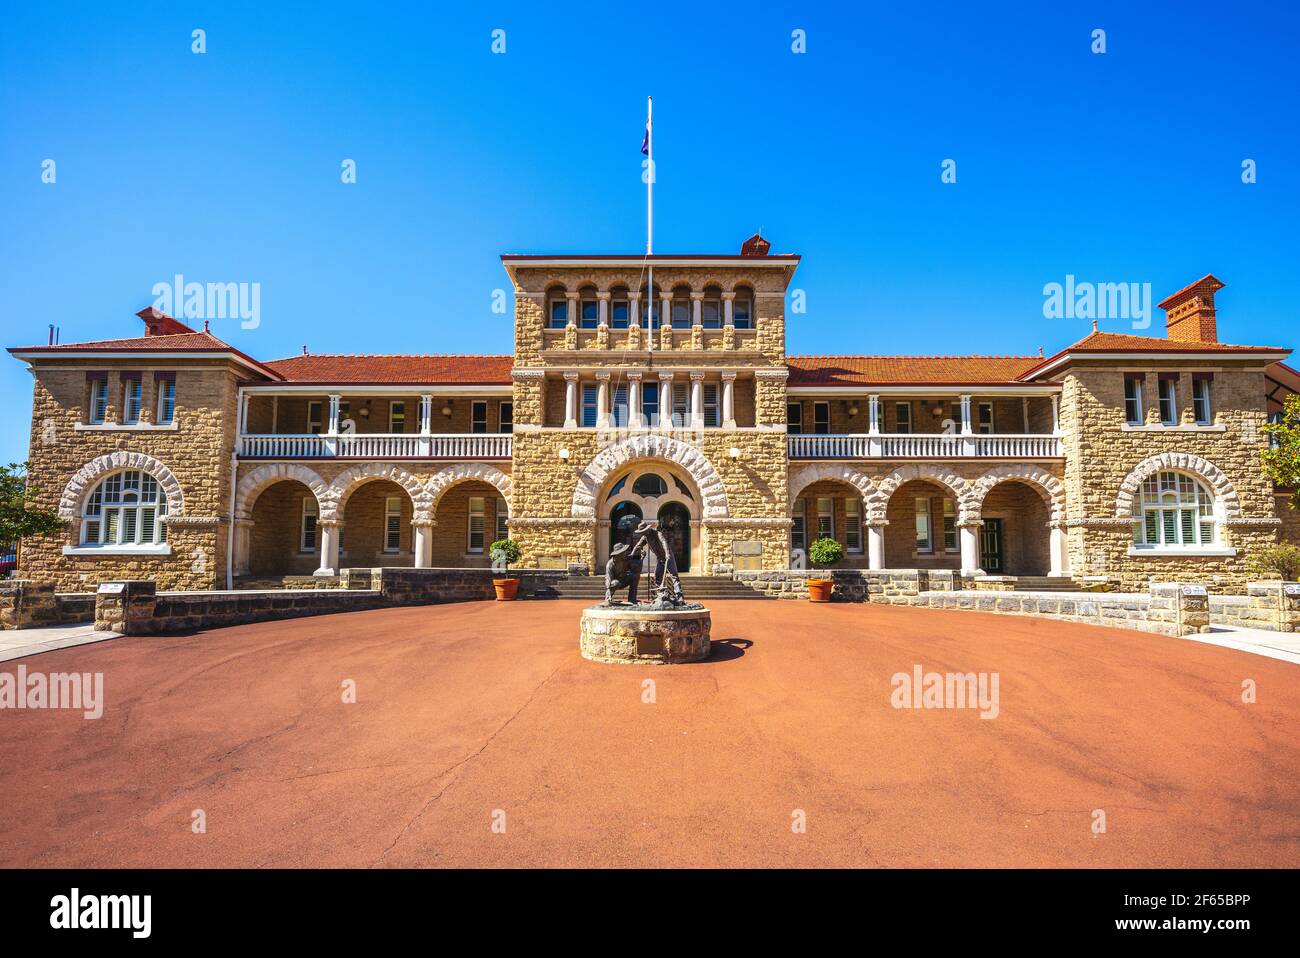 January 15, 2019: Perth Mint, established on 20 June 1899, is the official bullion mint of australia and wholly owned by the Government of Western Aus Stock Photo